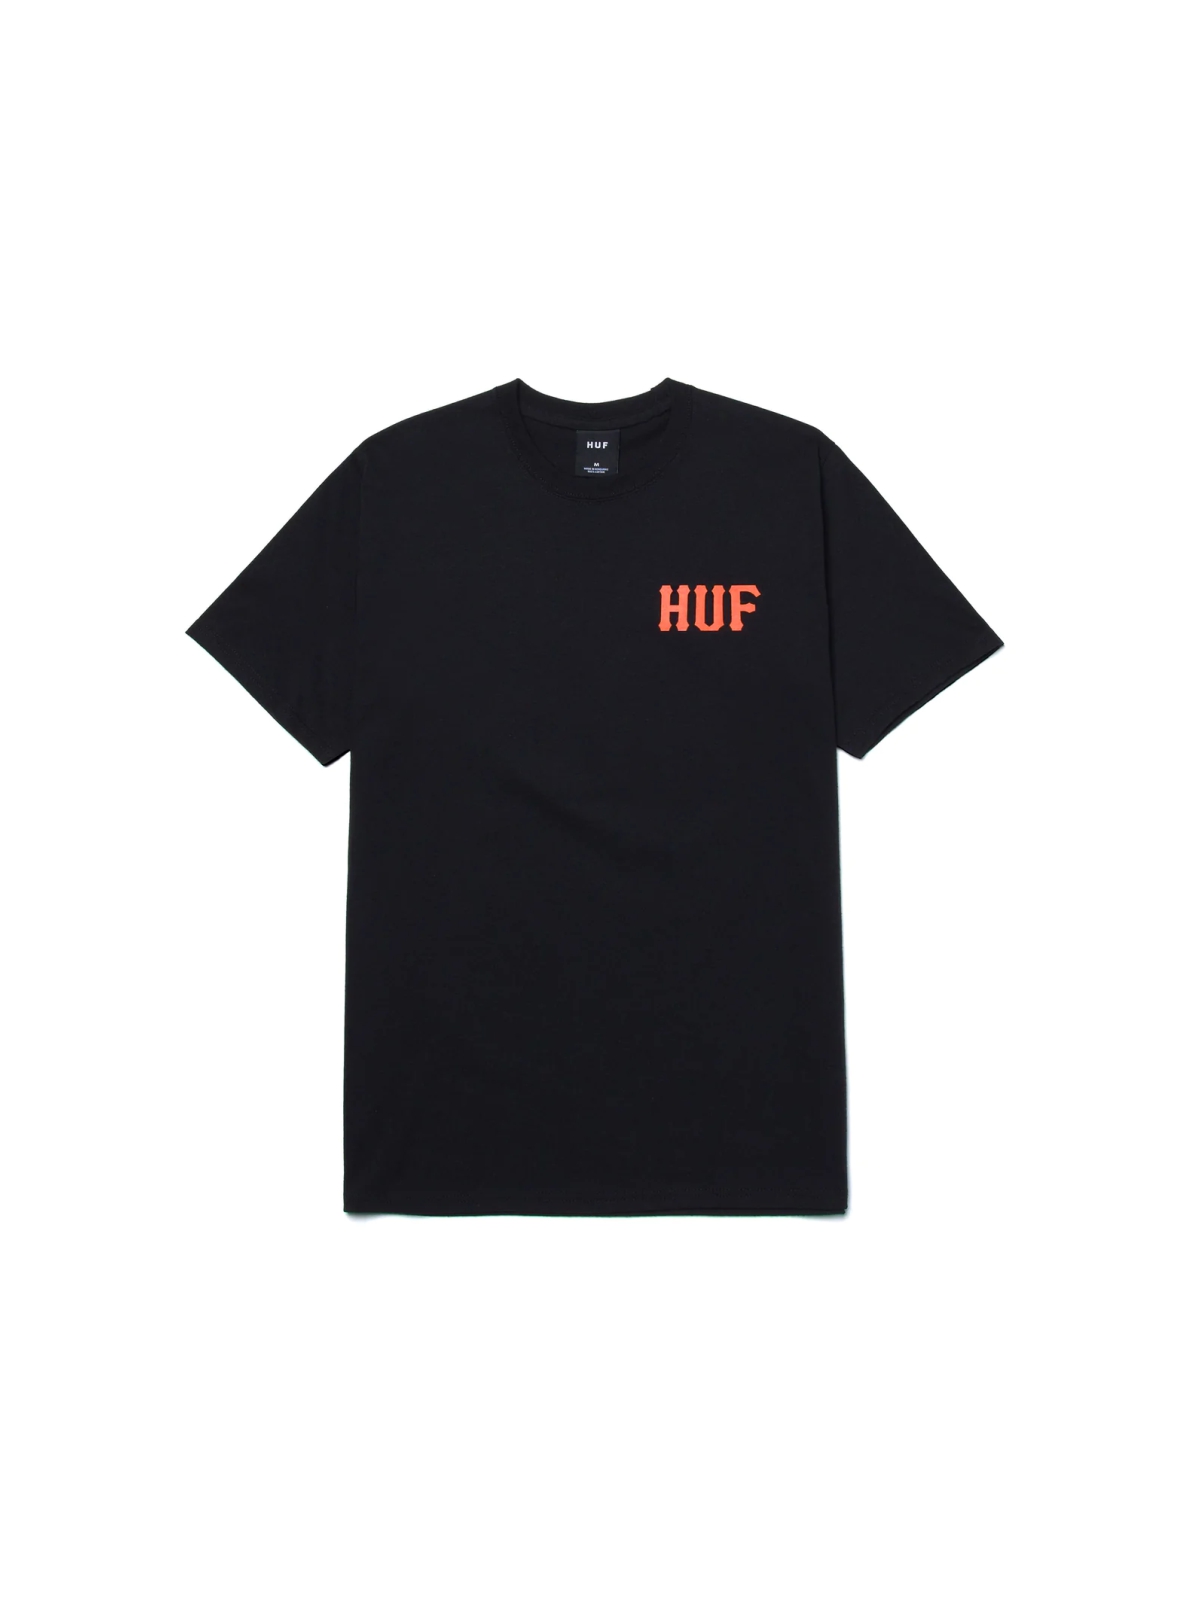 HUF Golden Gate Classic Tee Black – WORMHOLE STORE